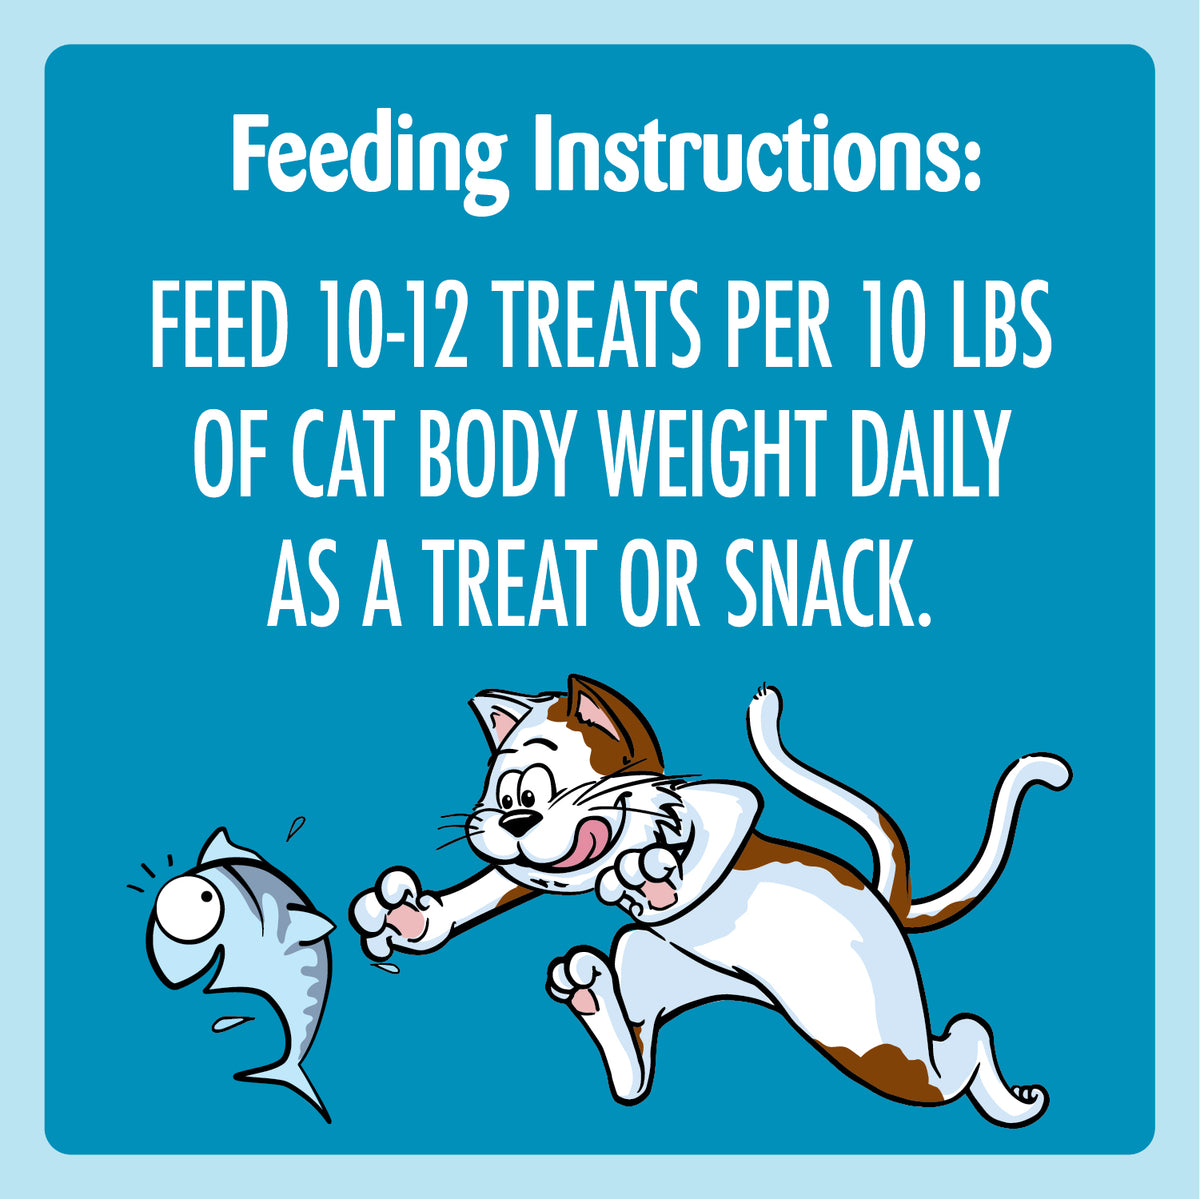 [Temptations][TEMPTATIONS Meaty Bites, Soft and Savory Cat Treats, Tuna Flavor, 4.1 oz. Pouch][Feeding Guidelines Image]